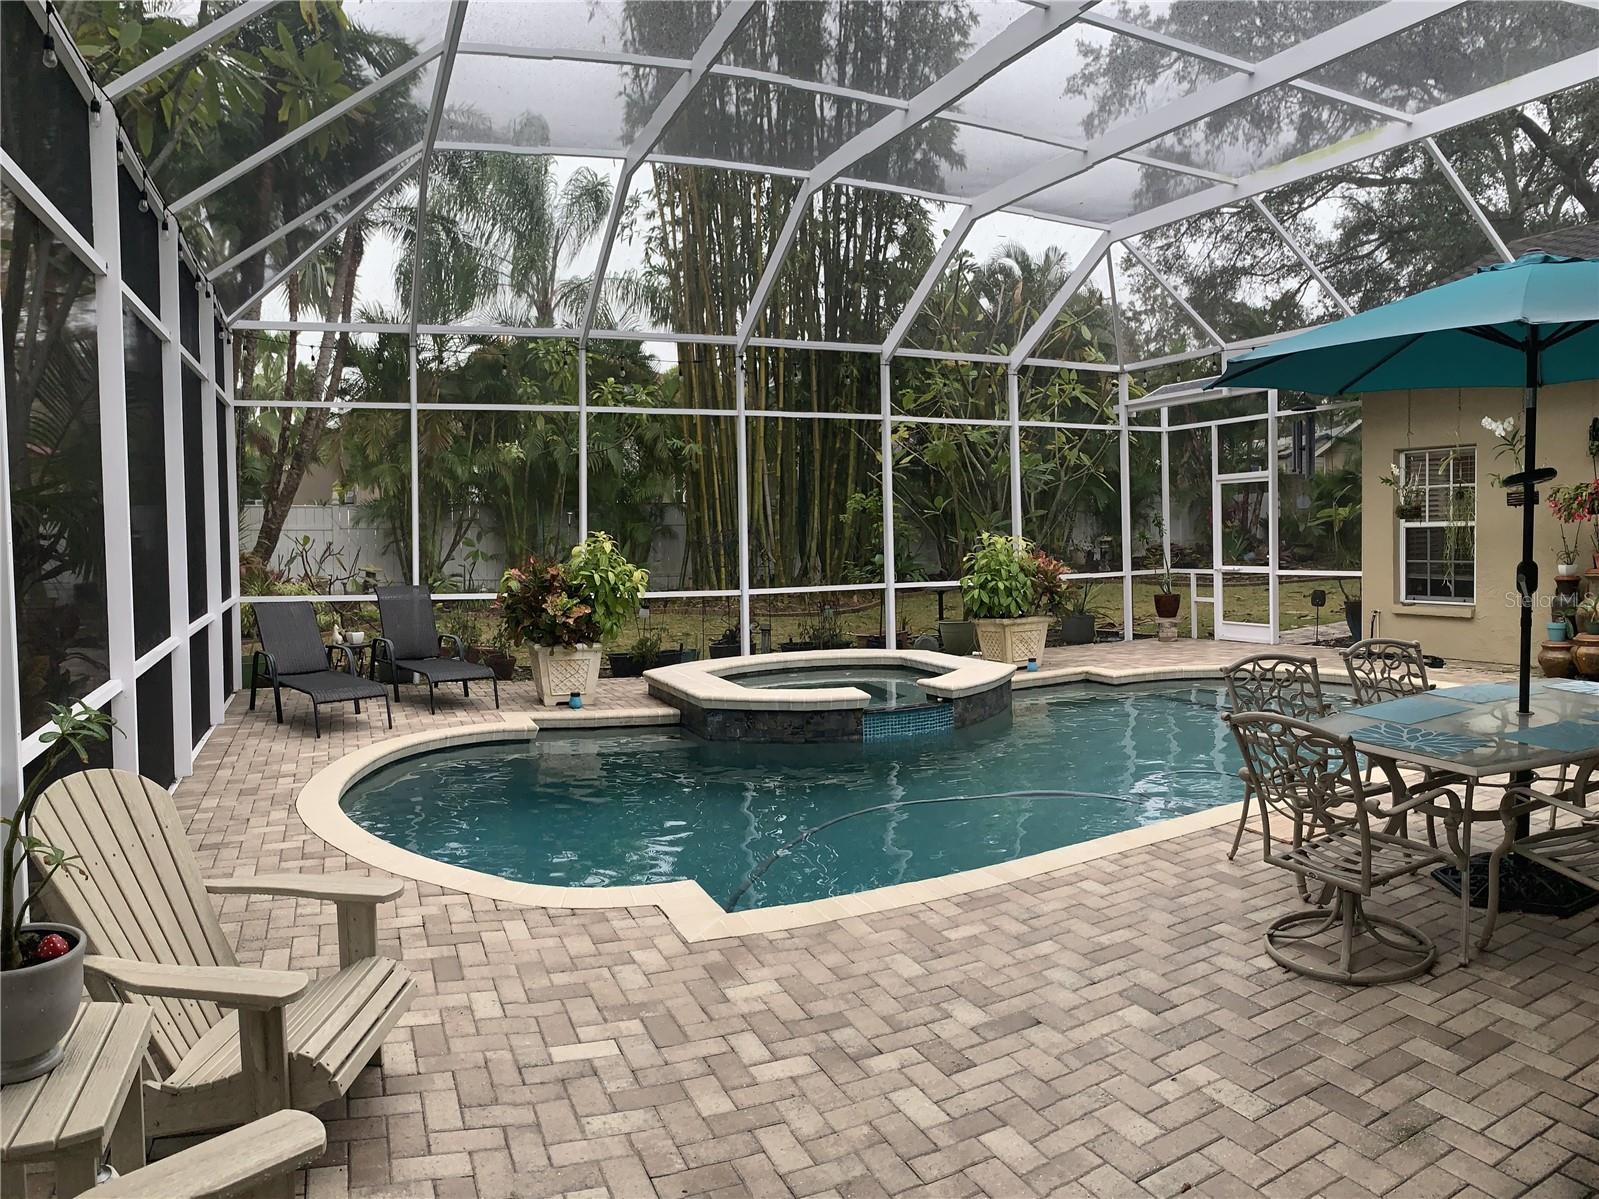 Lusious view of pool area